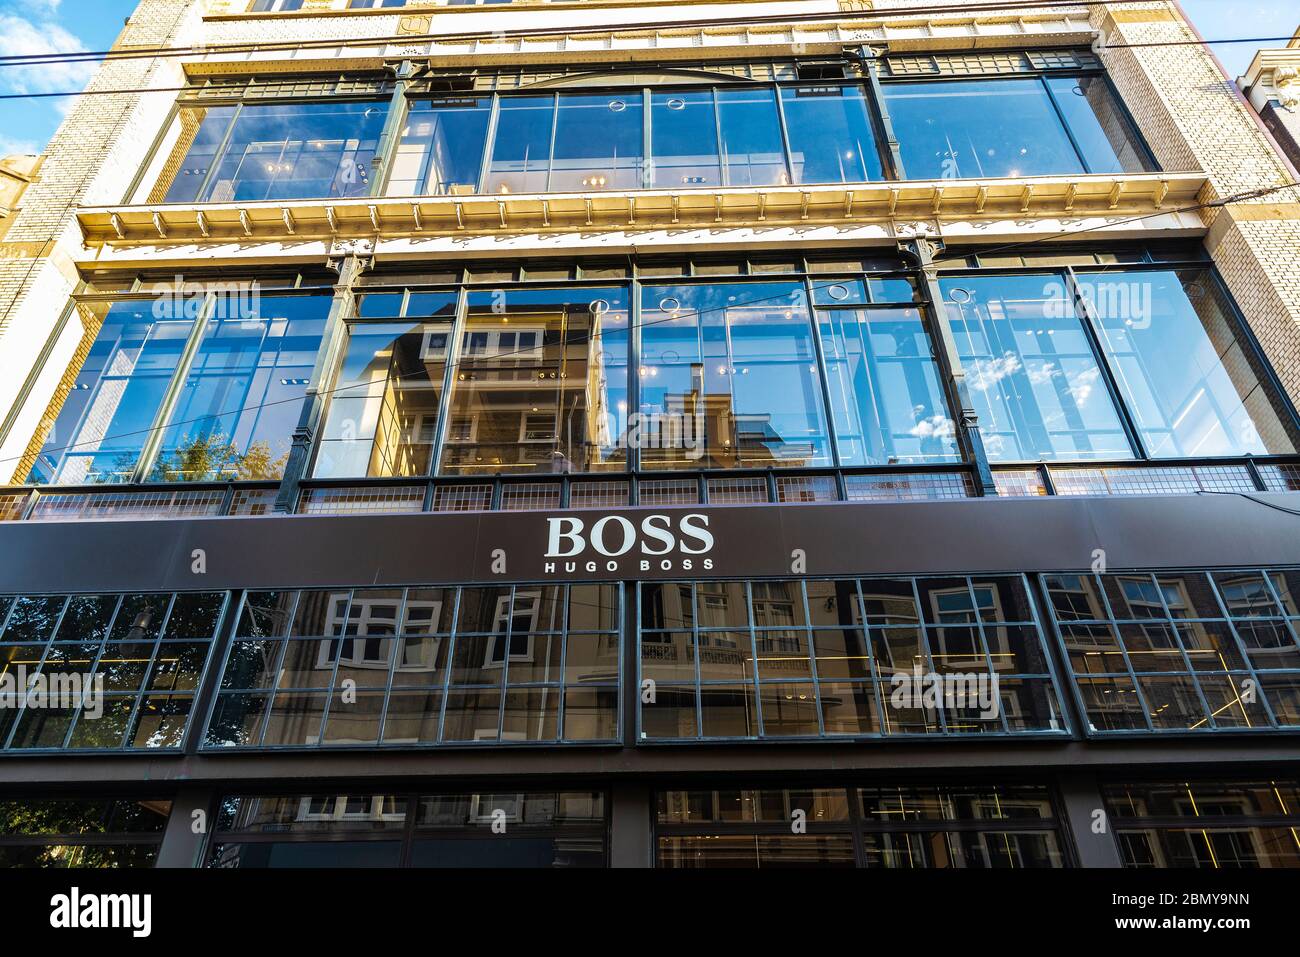 Facade of a Hugo Boss clothing store in 